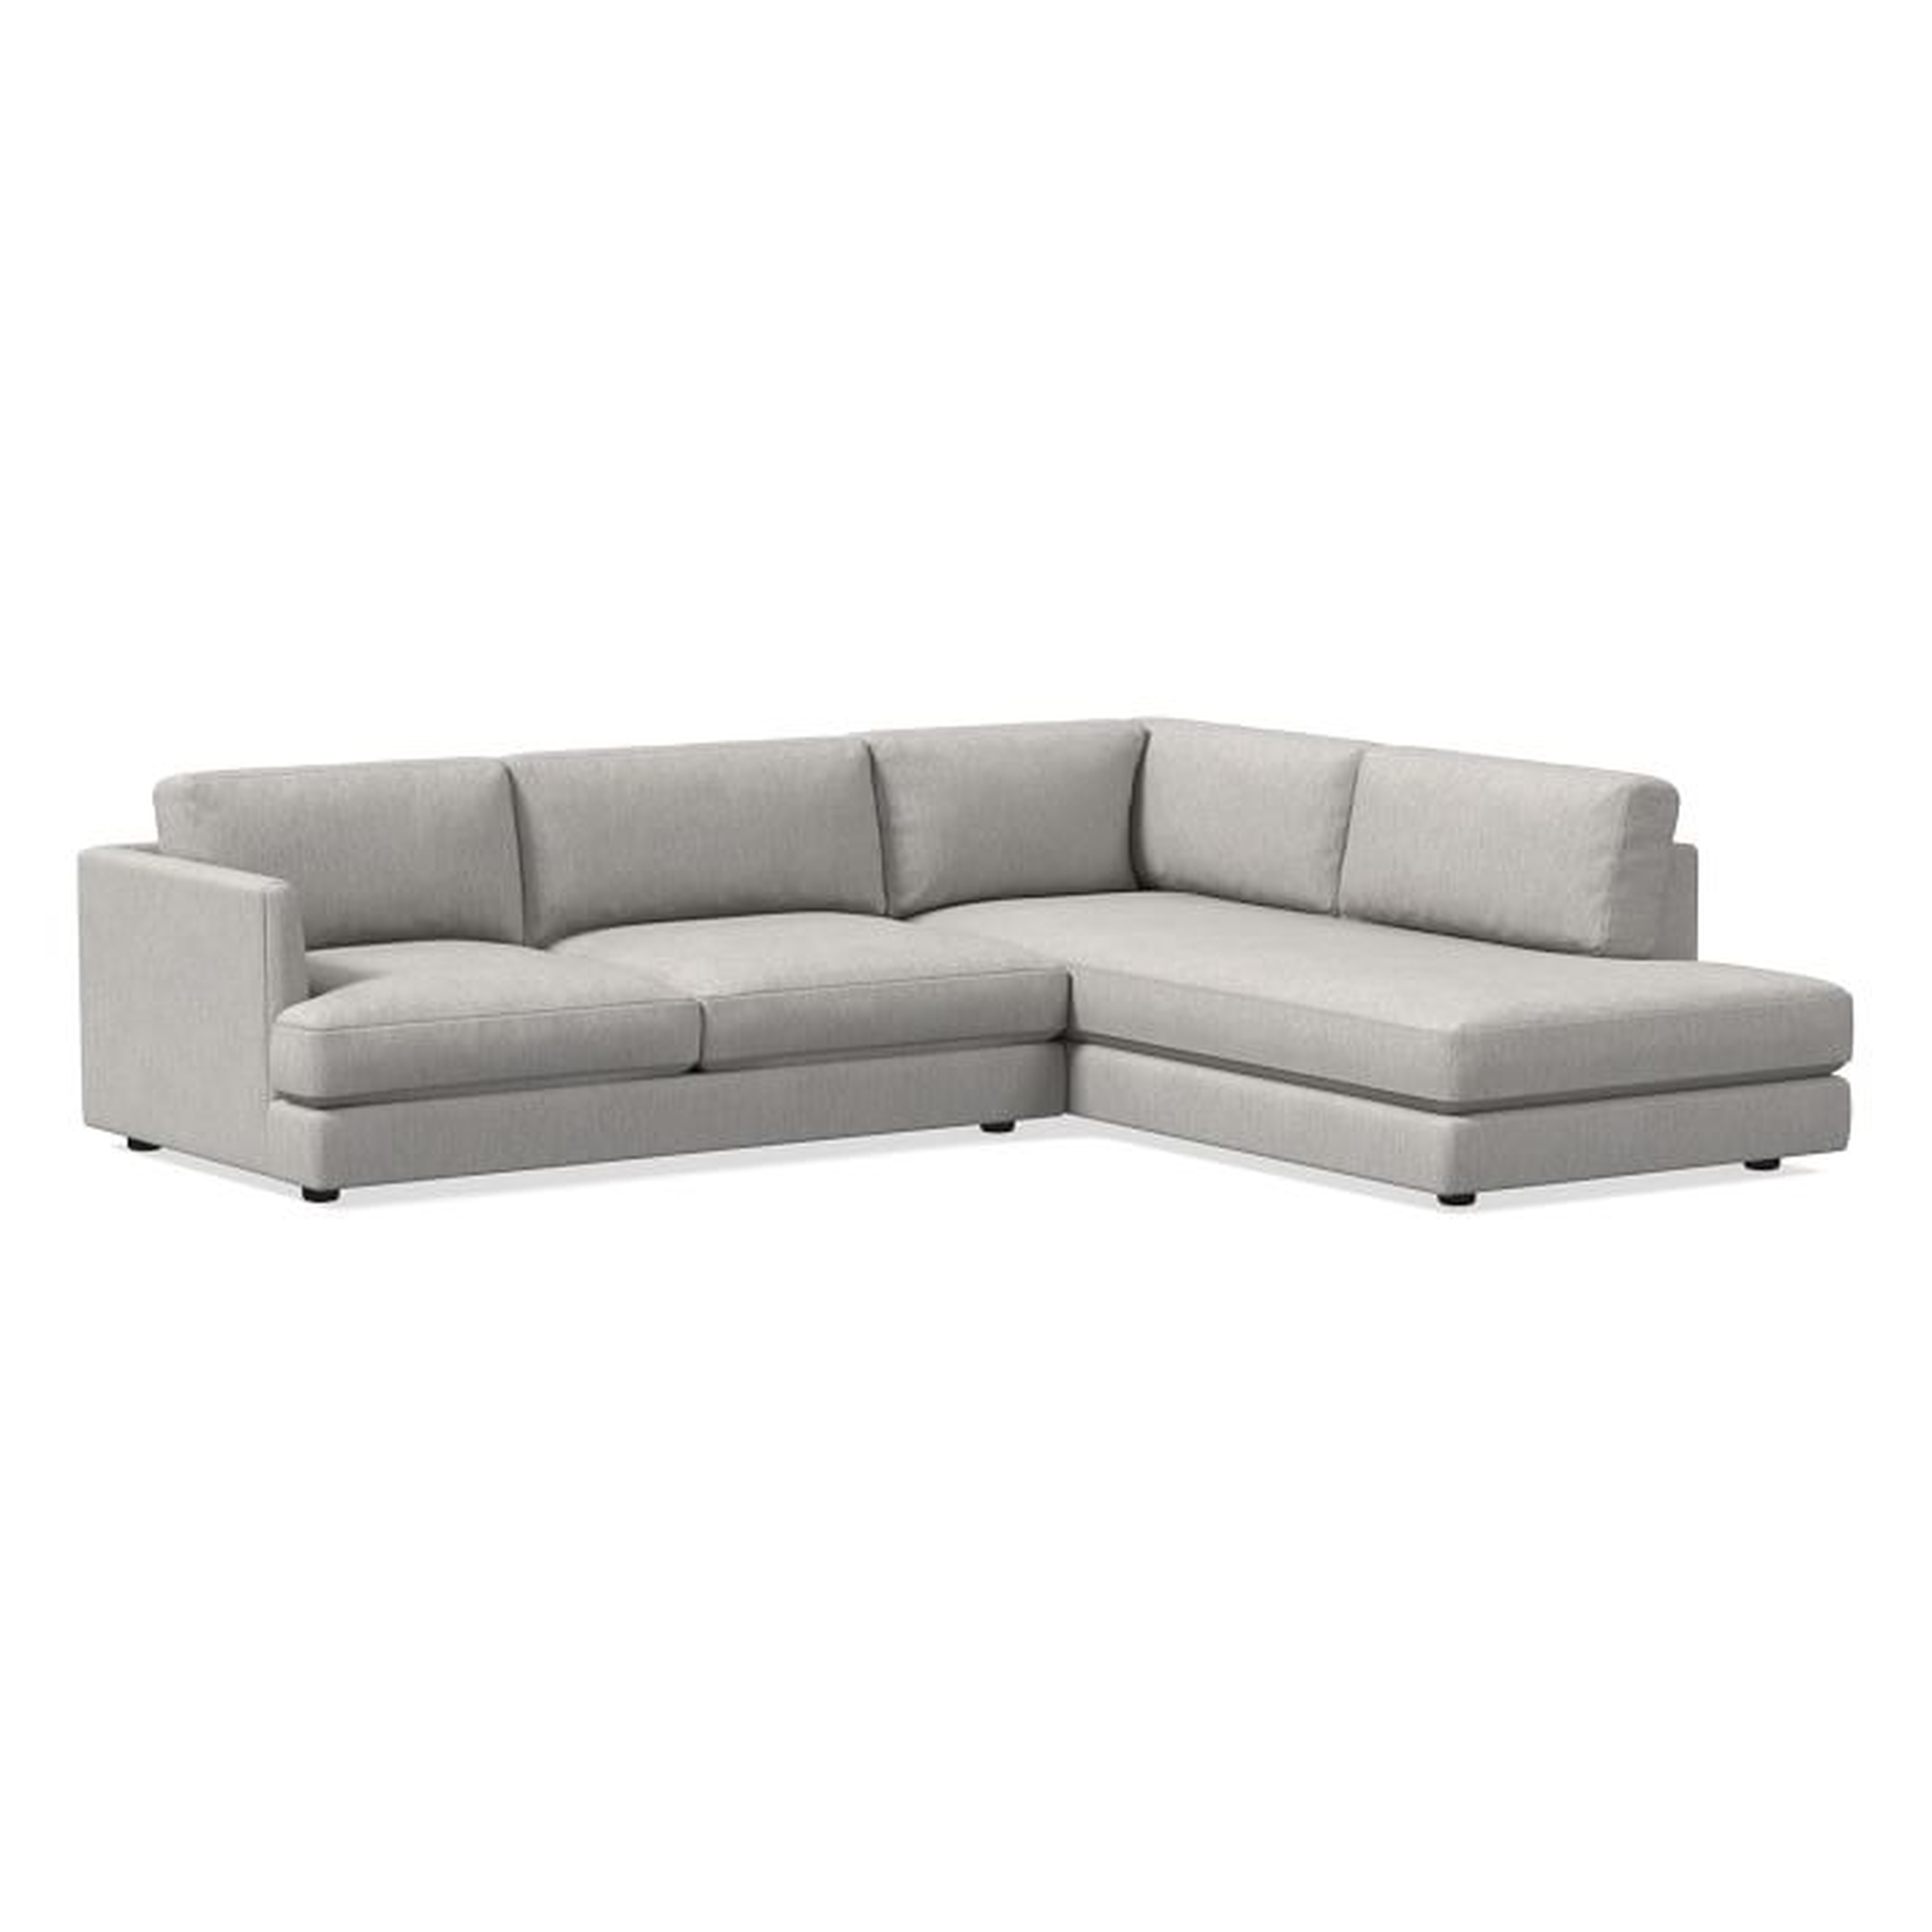 Harris Sectional Set 12: Right Arm 75" Sofa, Left Arm Terminal Chaise, Poly, Chenille Tweed, Irongate, - West Elm